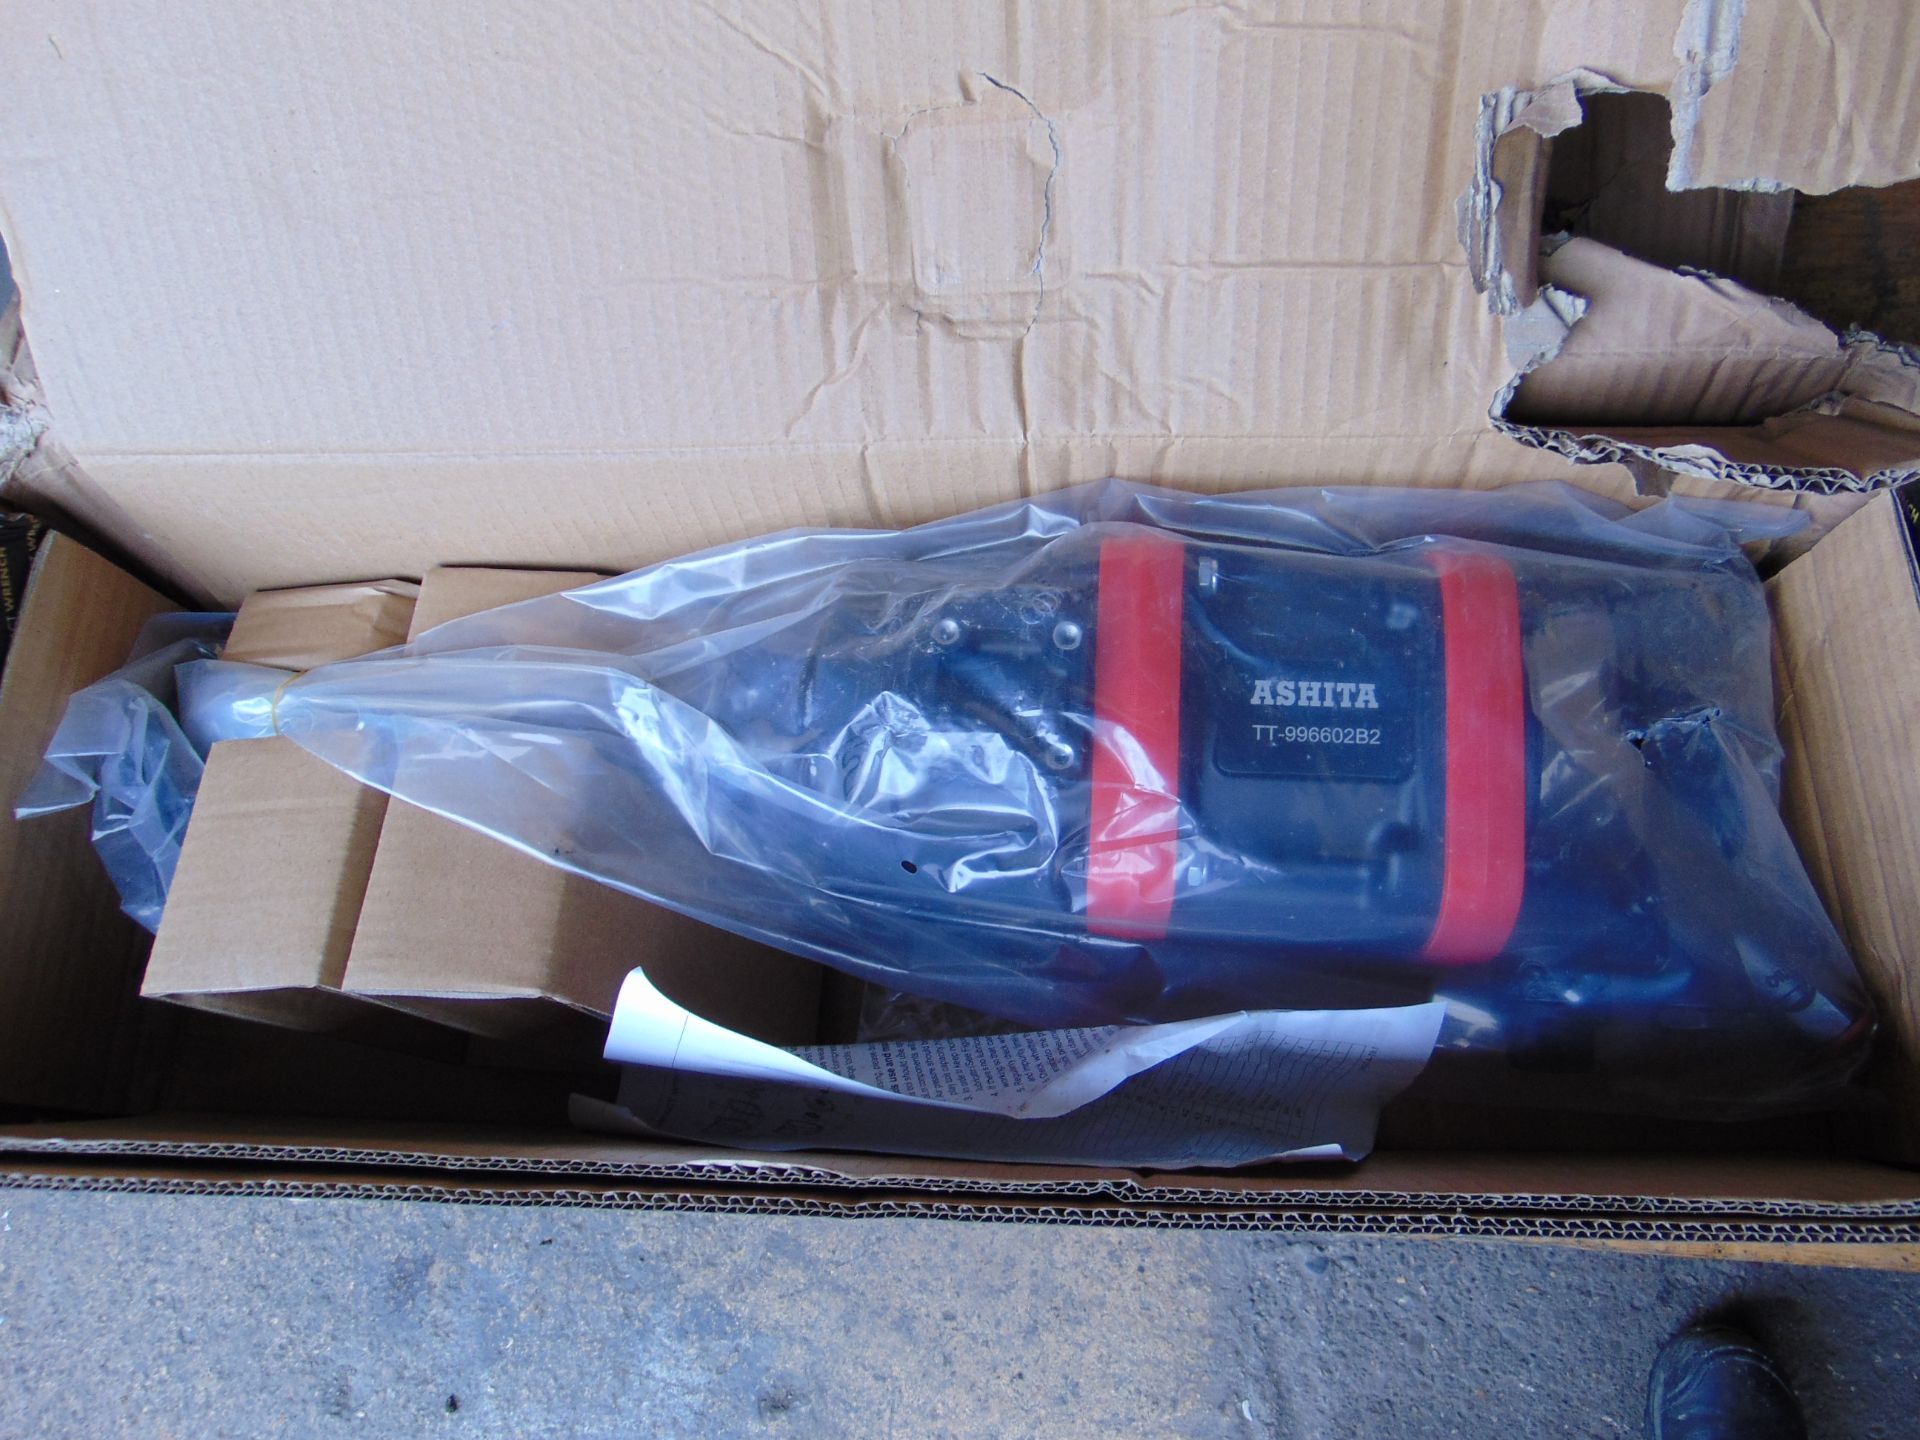 New / Unused 1 inch Air Impact Wrench - Image 10 of 15